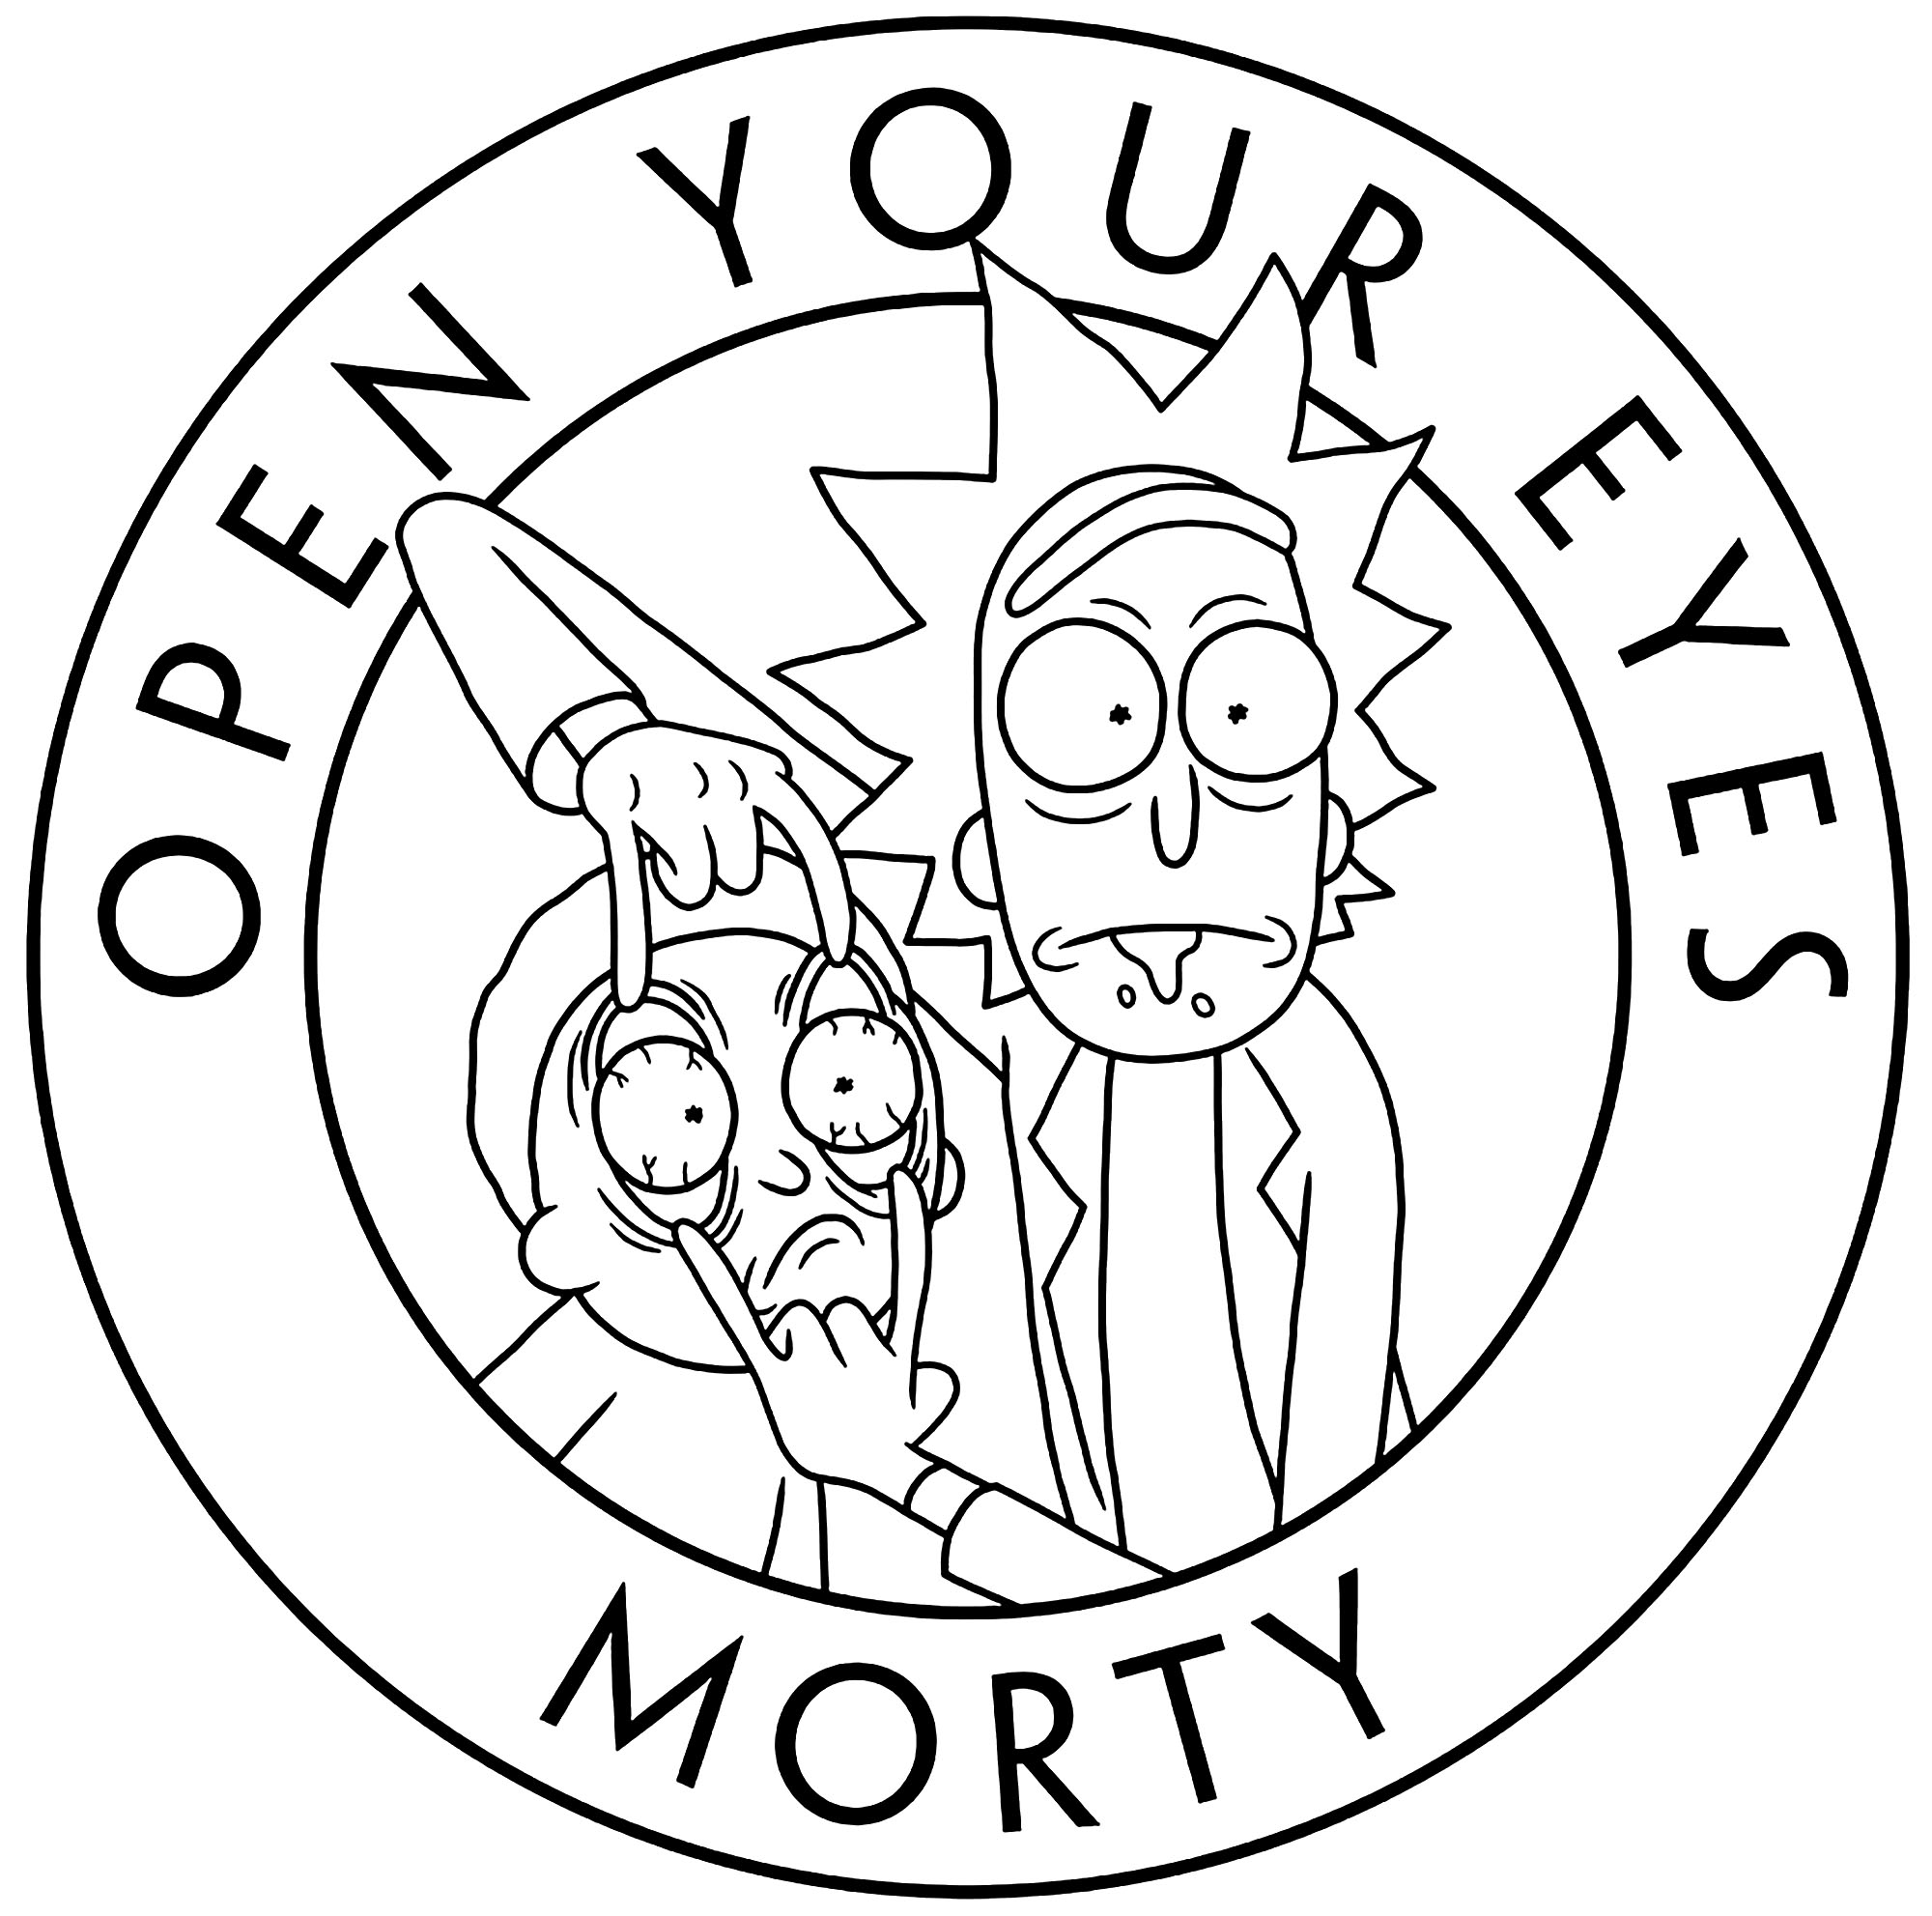 Rick and Morty Coloring Pages - Best Coloring Pages For Kids